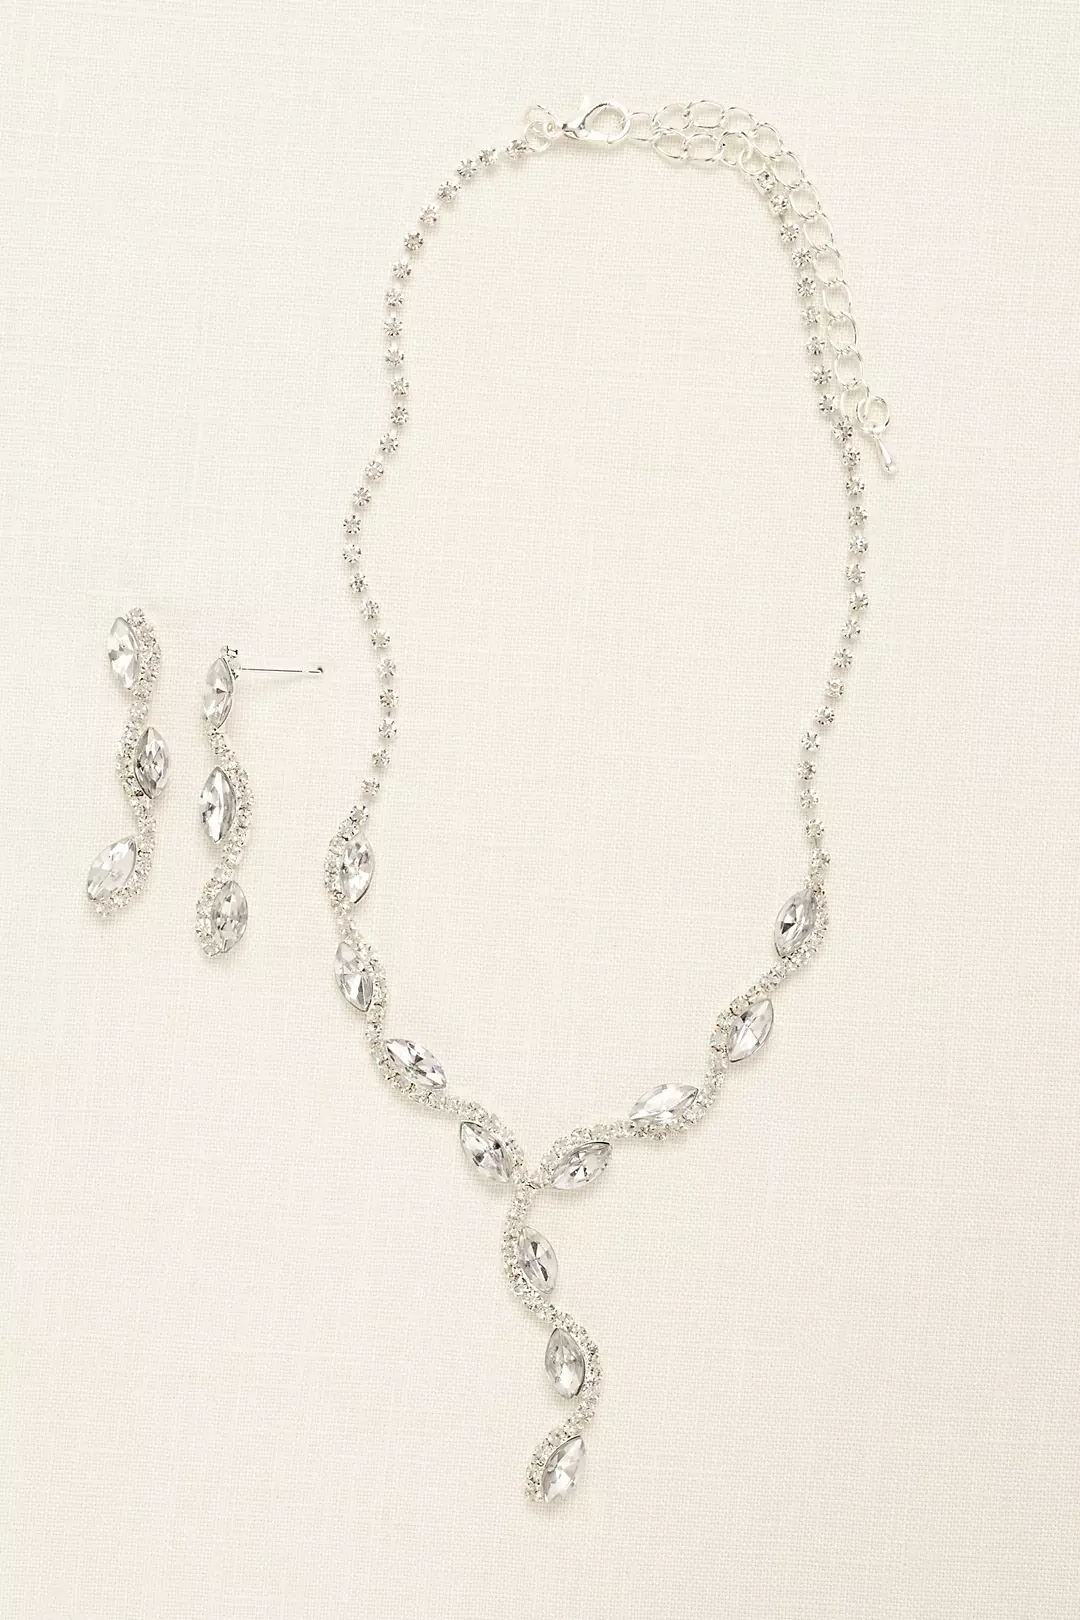 Scalloped Marquise Necklace and Earring Set Image